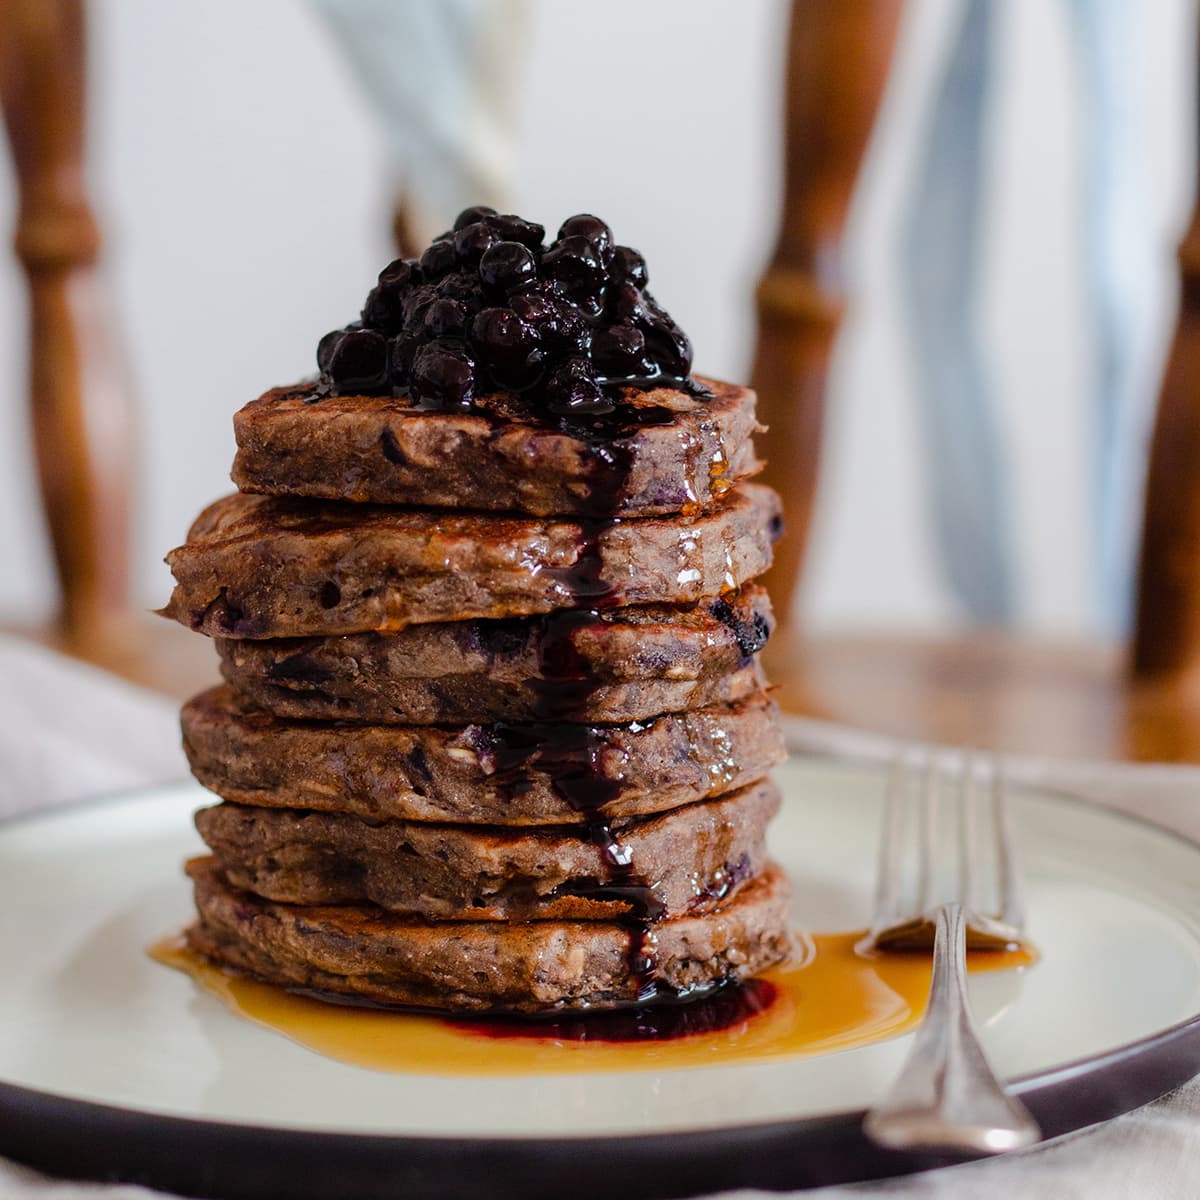 Buckwheat banana pancakes stacked on a beige plate on a chair.